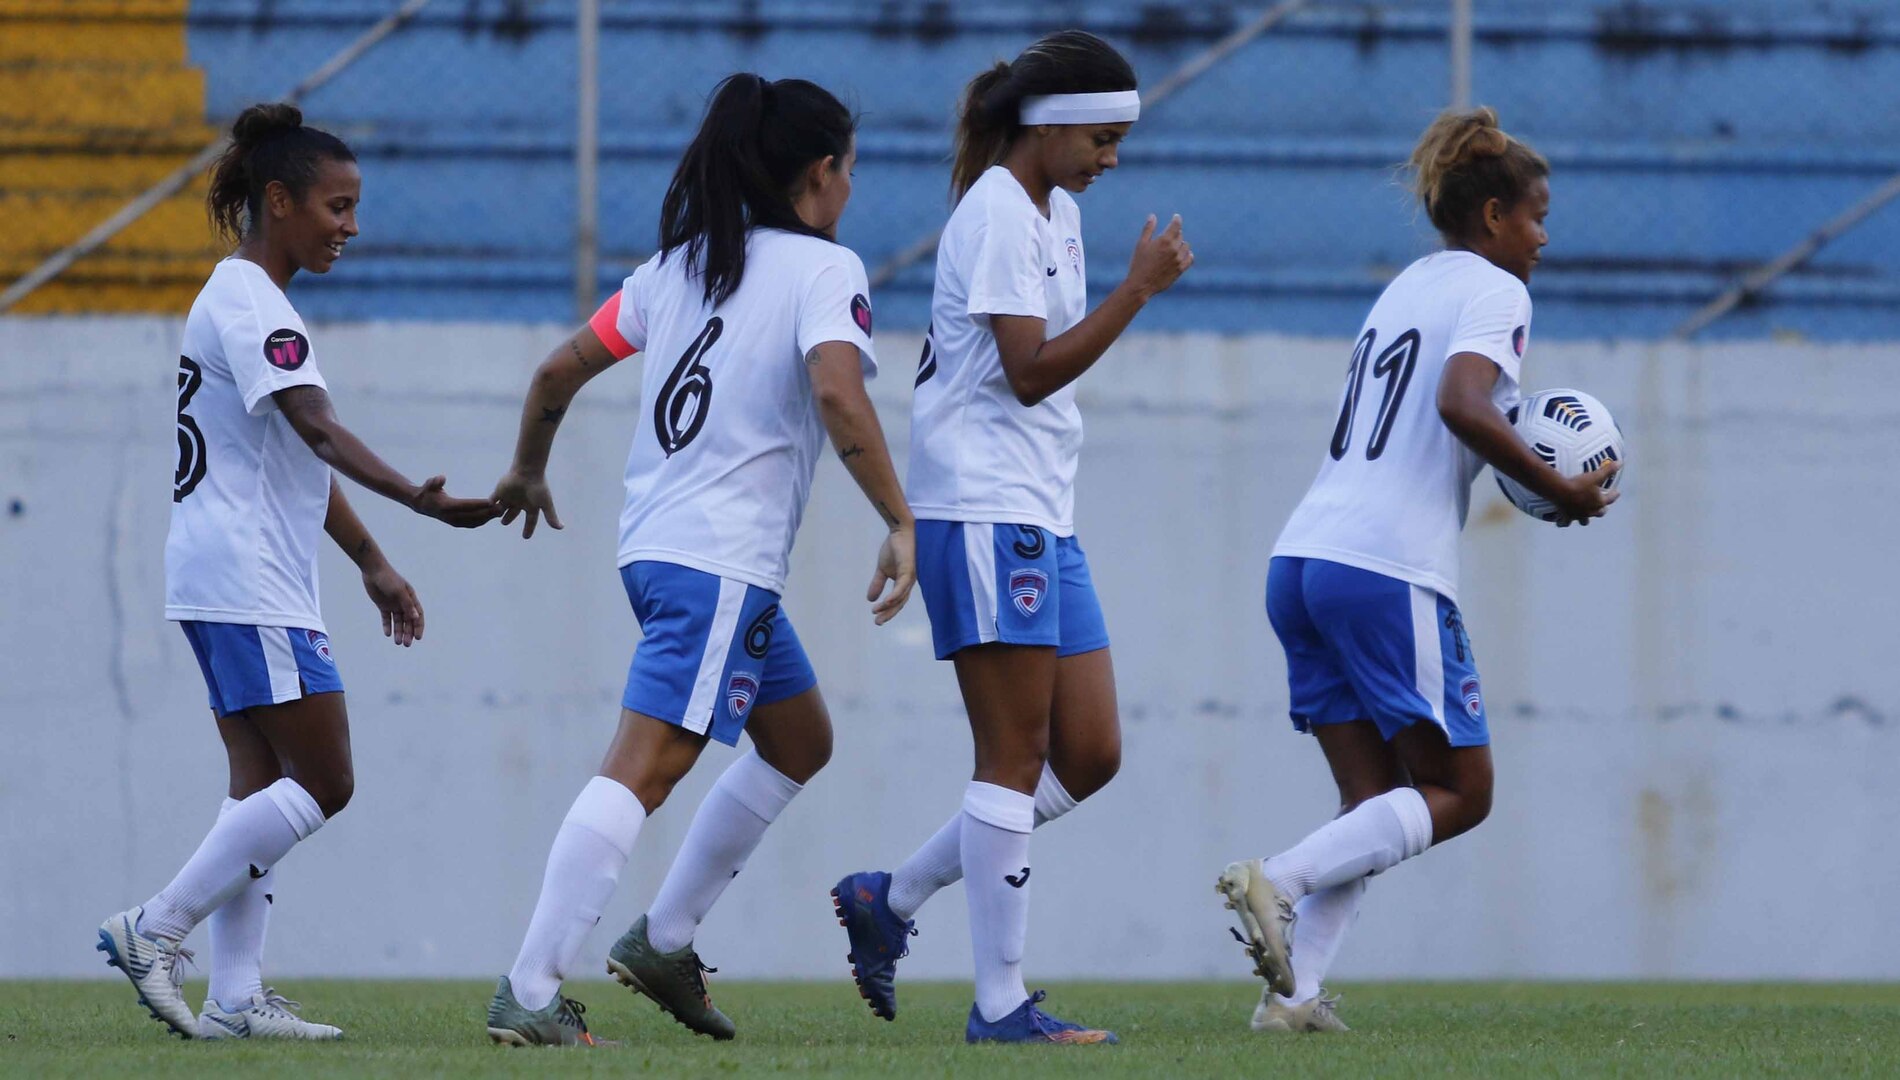 Cuba's first taste of Women's World Cup qualifying coincides with